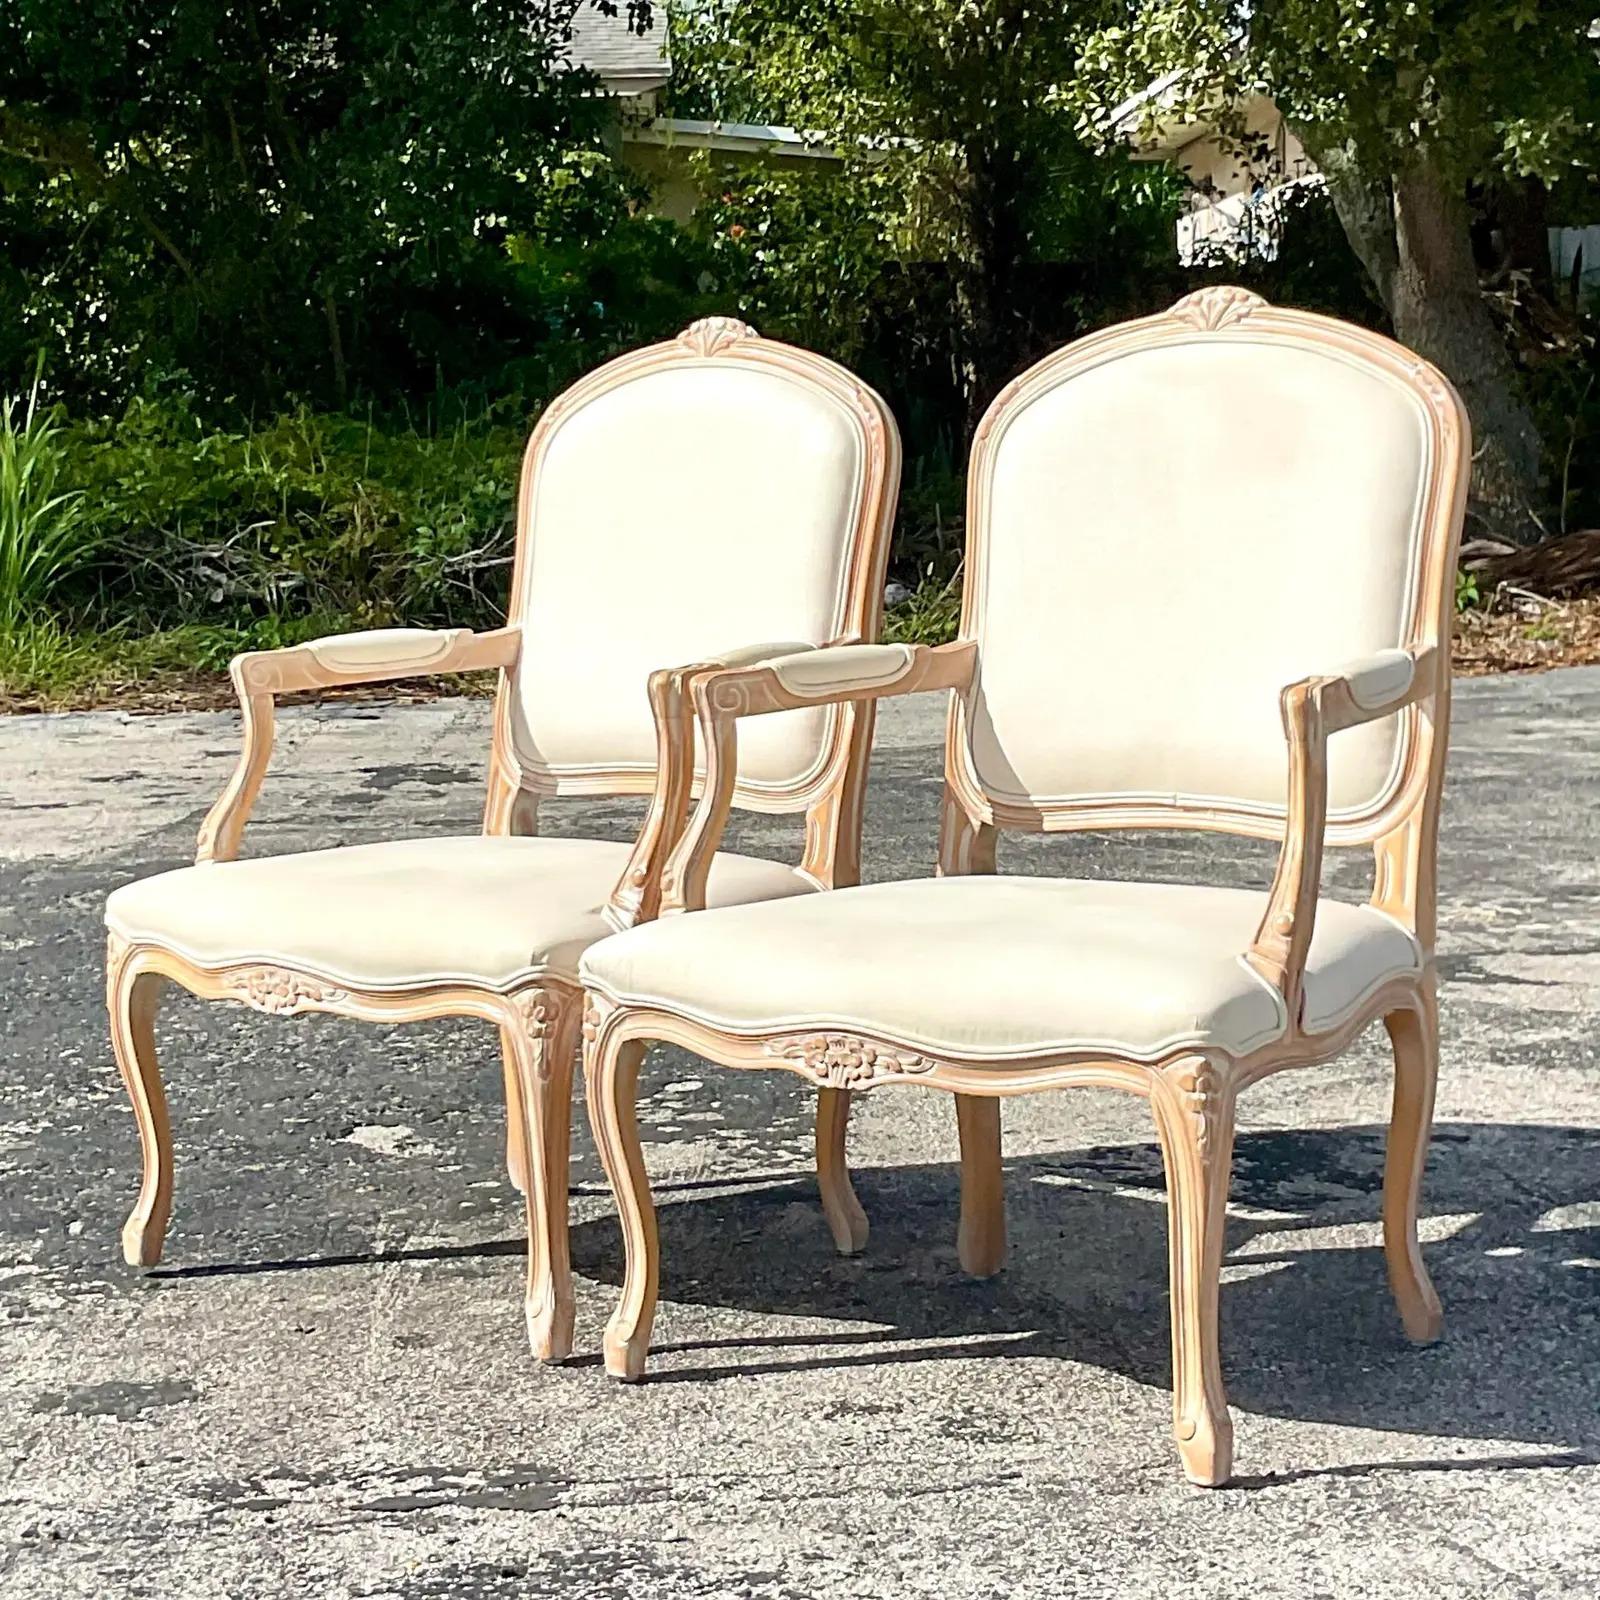 North American Vintage Regency Bergere Chairs - A Pair For Sale